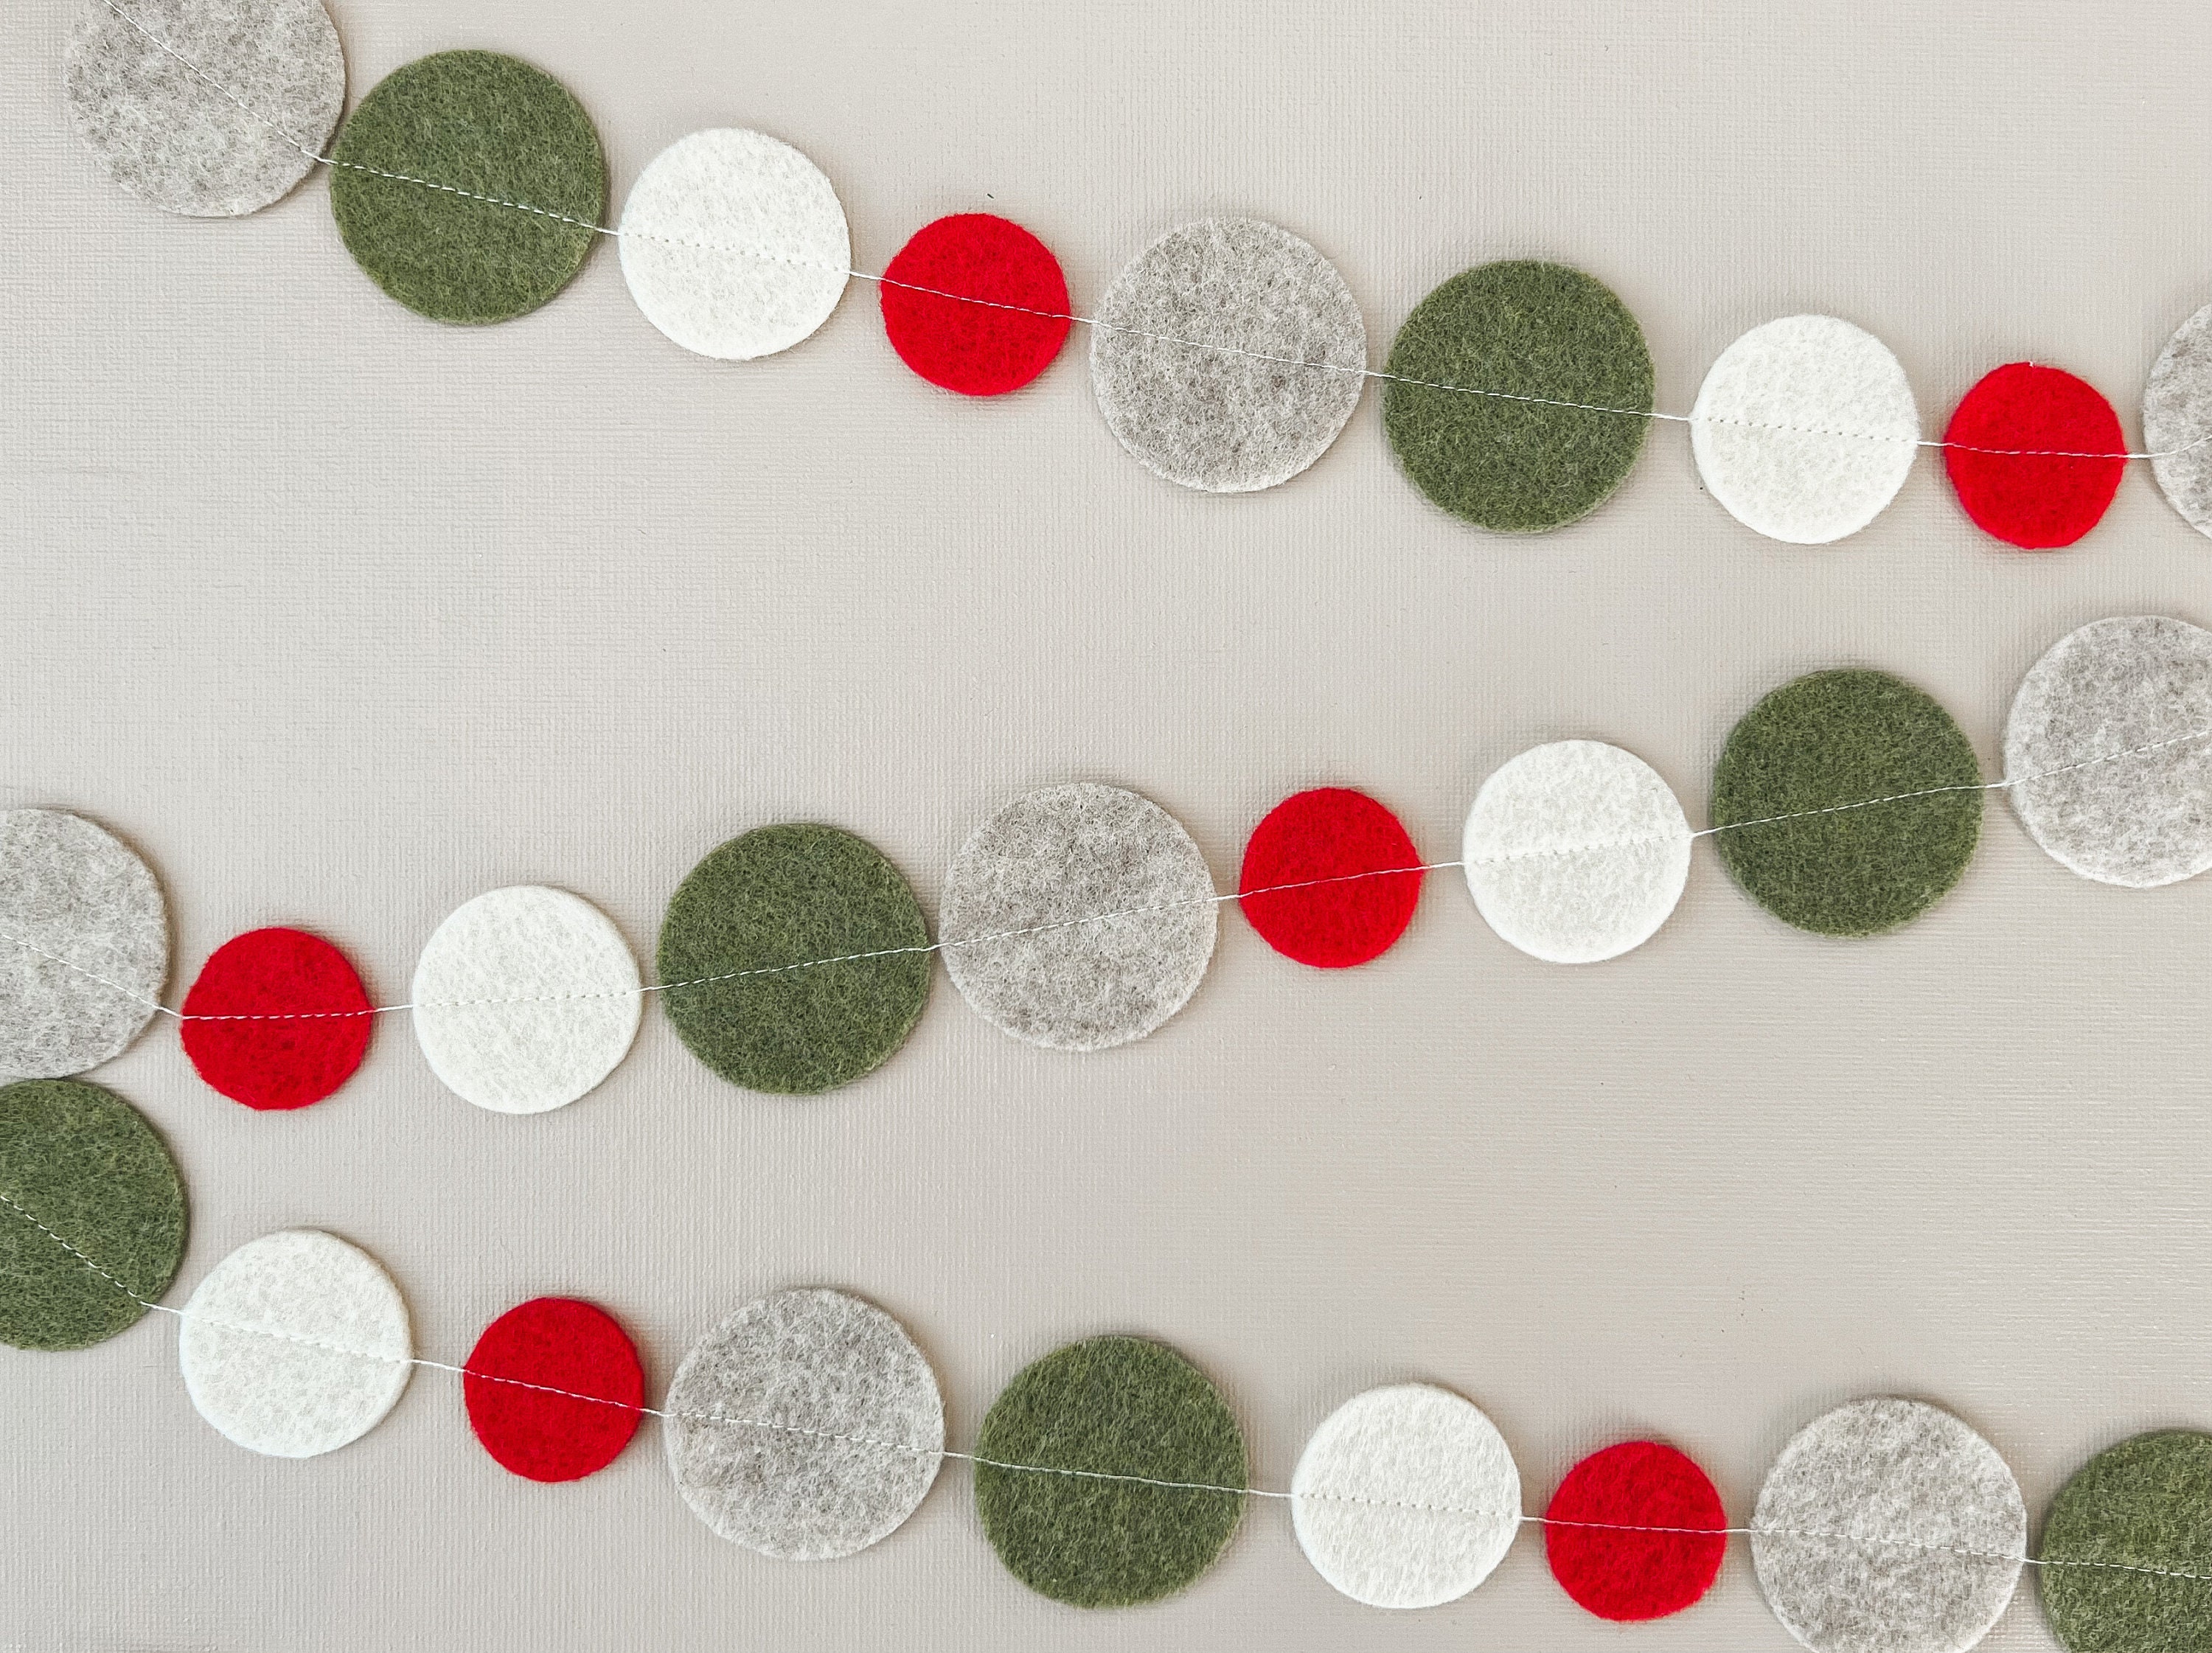 White Adhesive Felt Circles: Variety of Sizes: ½”, ¾”, 1 or 1.5 Wide; Package Sizes for Wholesale Pricing, Die Cut Stickers Ready to Use for DIY